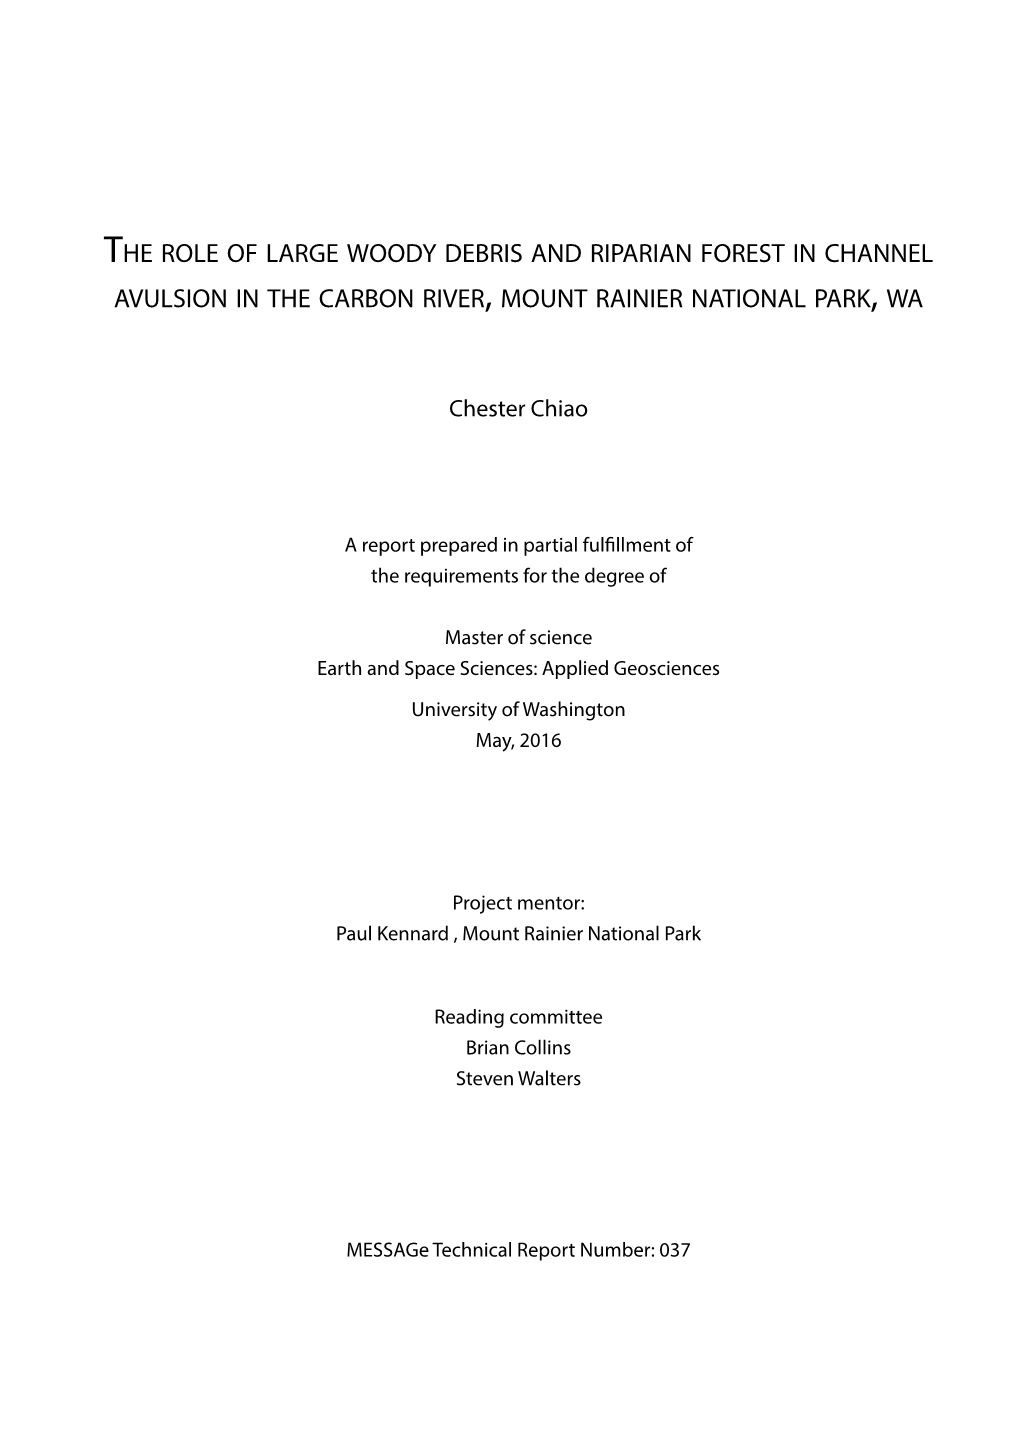 The Role of Large Woody Debris and Riparian Forest in Channel Avulsion in the Carbon River, Mount Rainier National Park, Wa